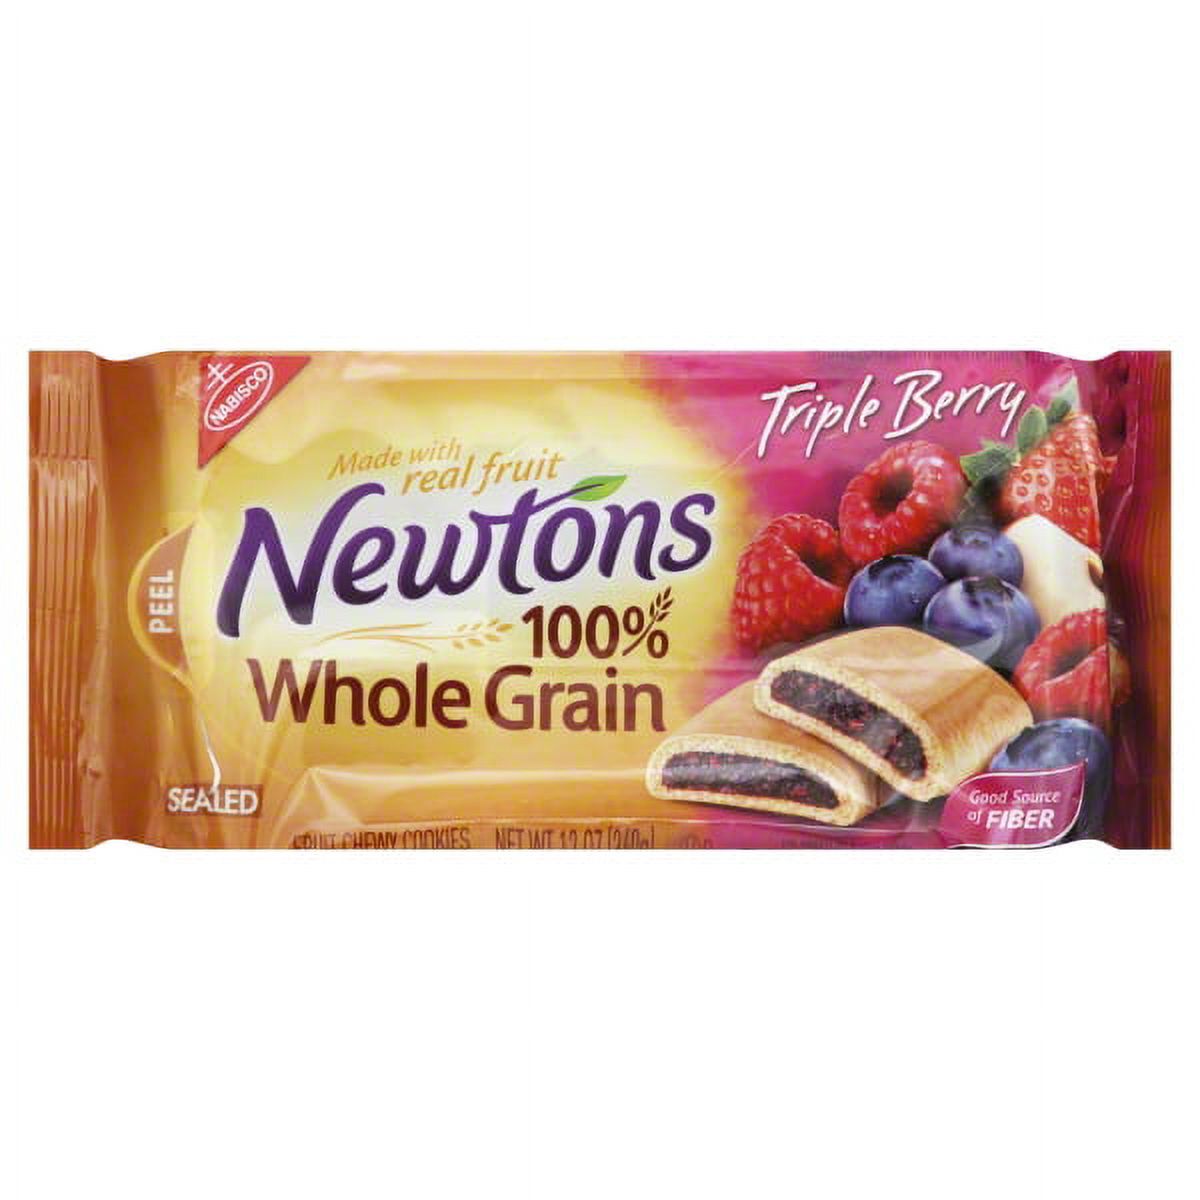 Nabisco Newtons Whole Triple Berry Chewy Cookies, 12 Oz. - image 1 of 6